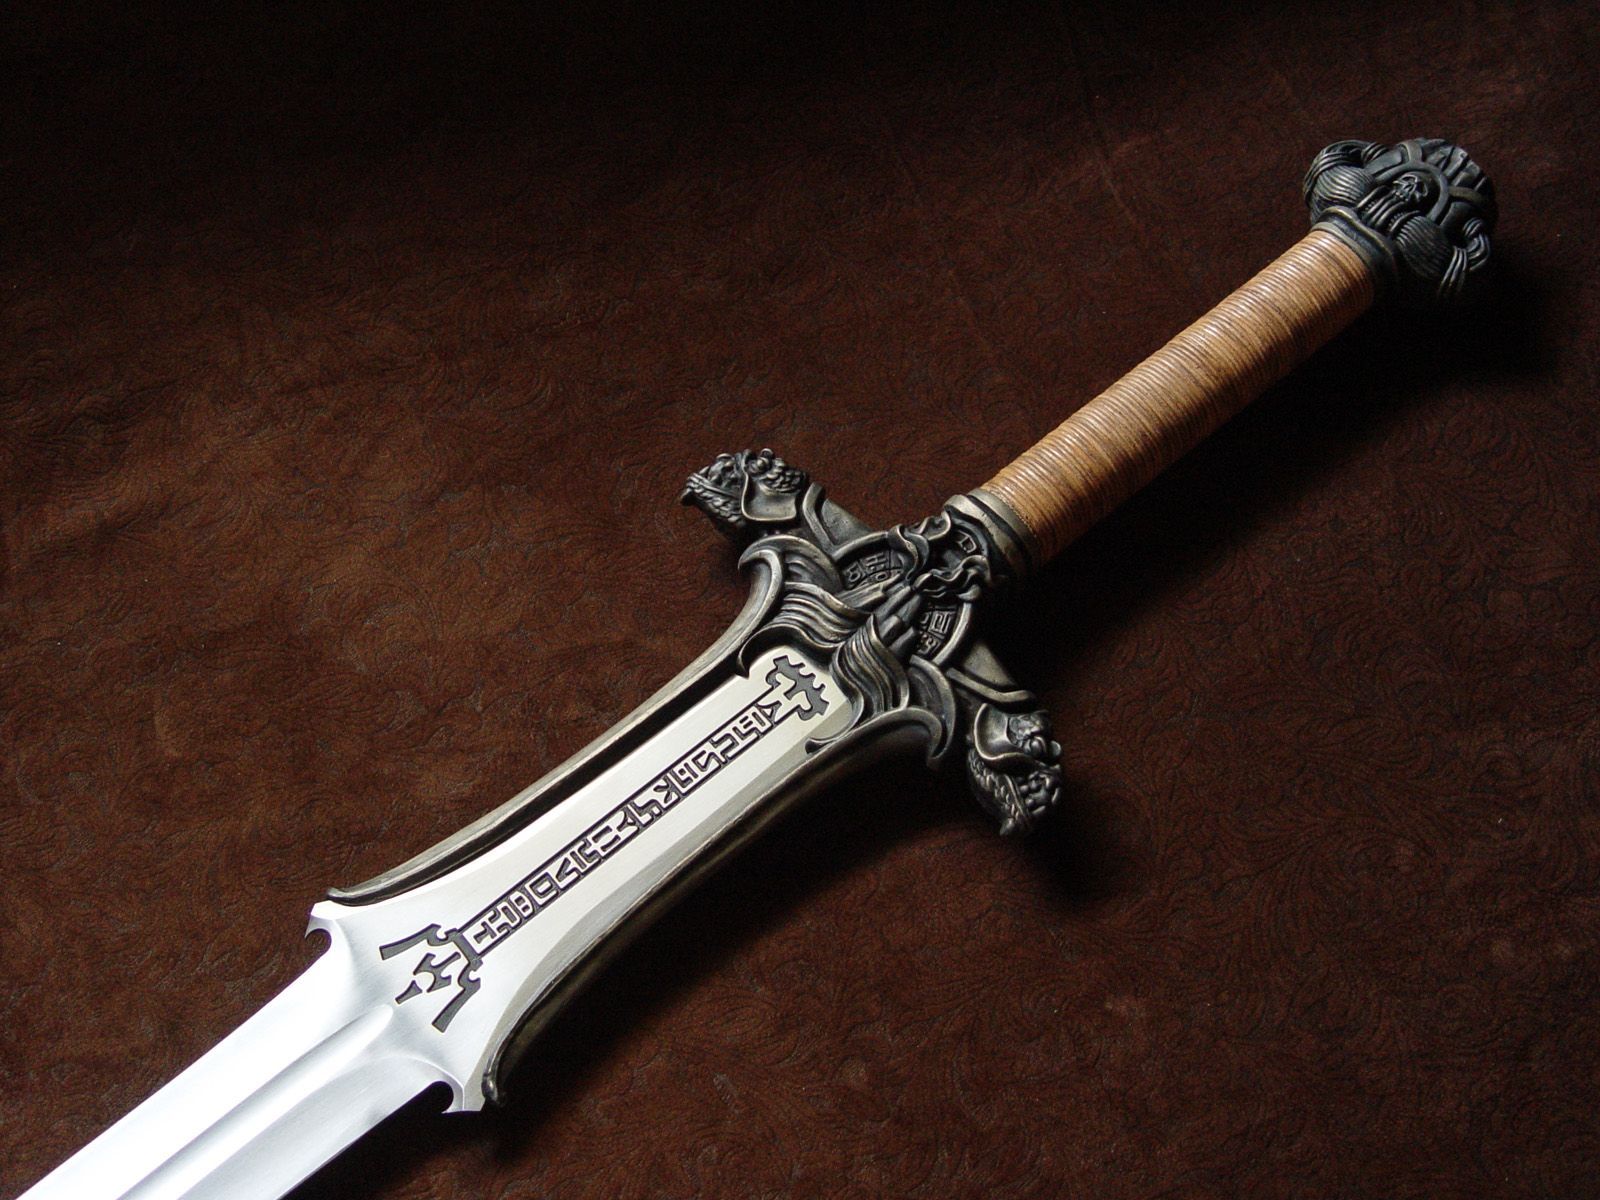 37 Sword HD Wallpapers | Backgrounds - Wallpaper Abyss